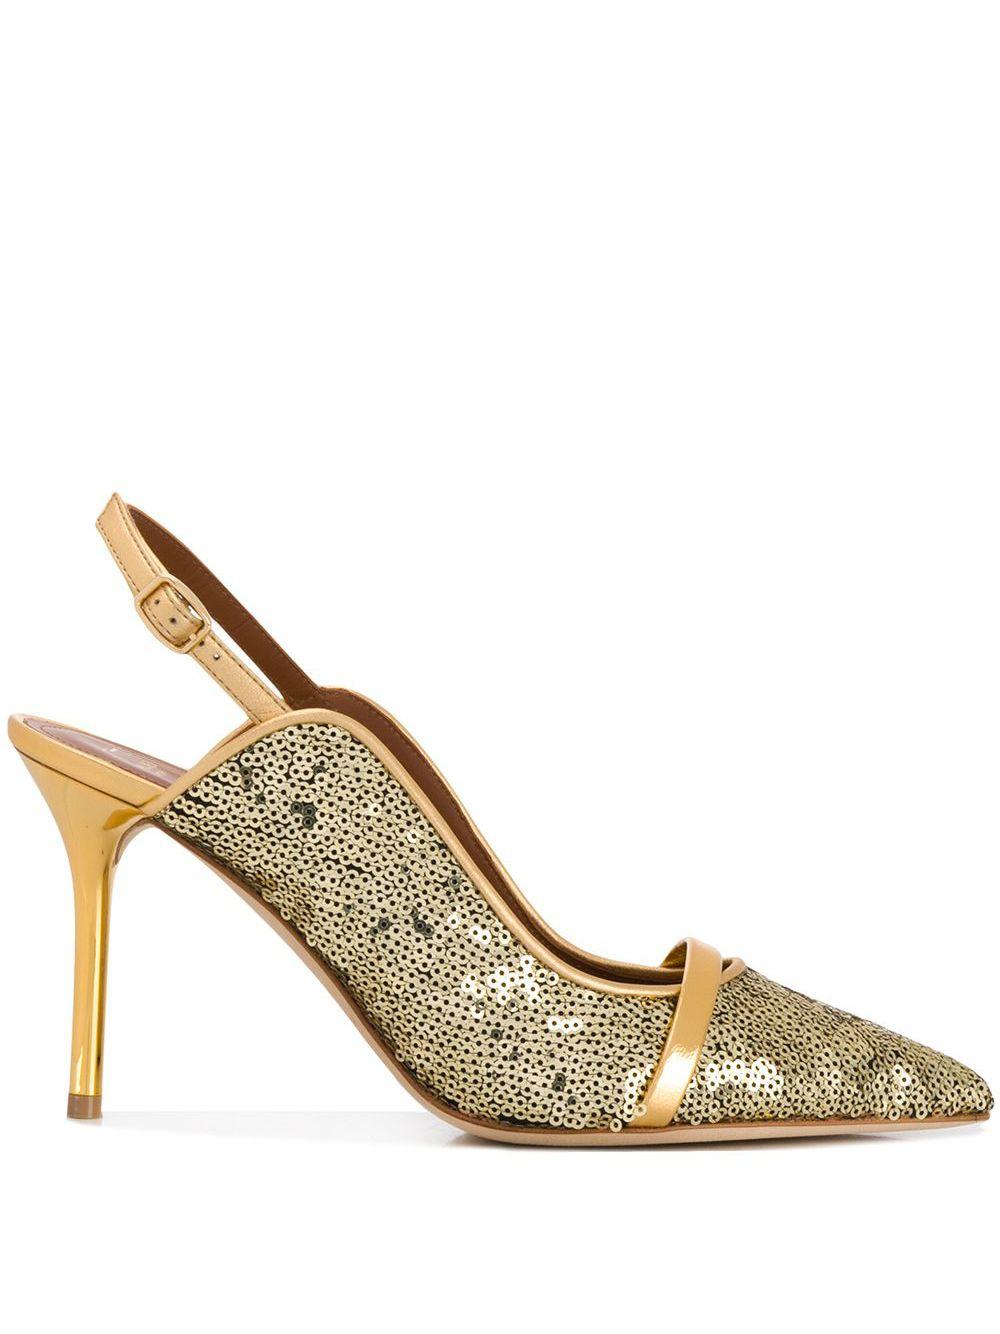 Malone Souliers Leather Marion Slingback Pumps in Gold (Metallic ...